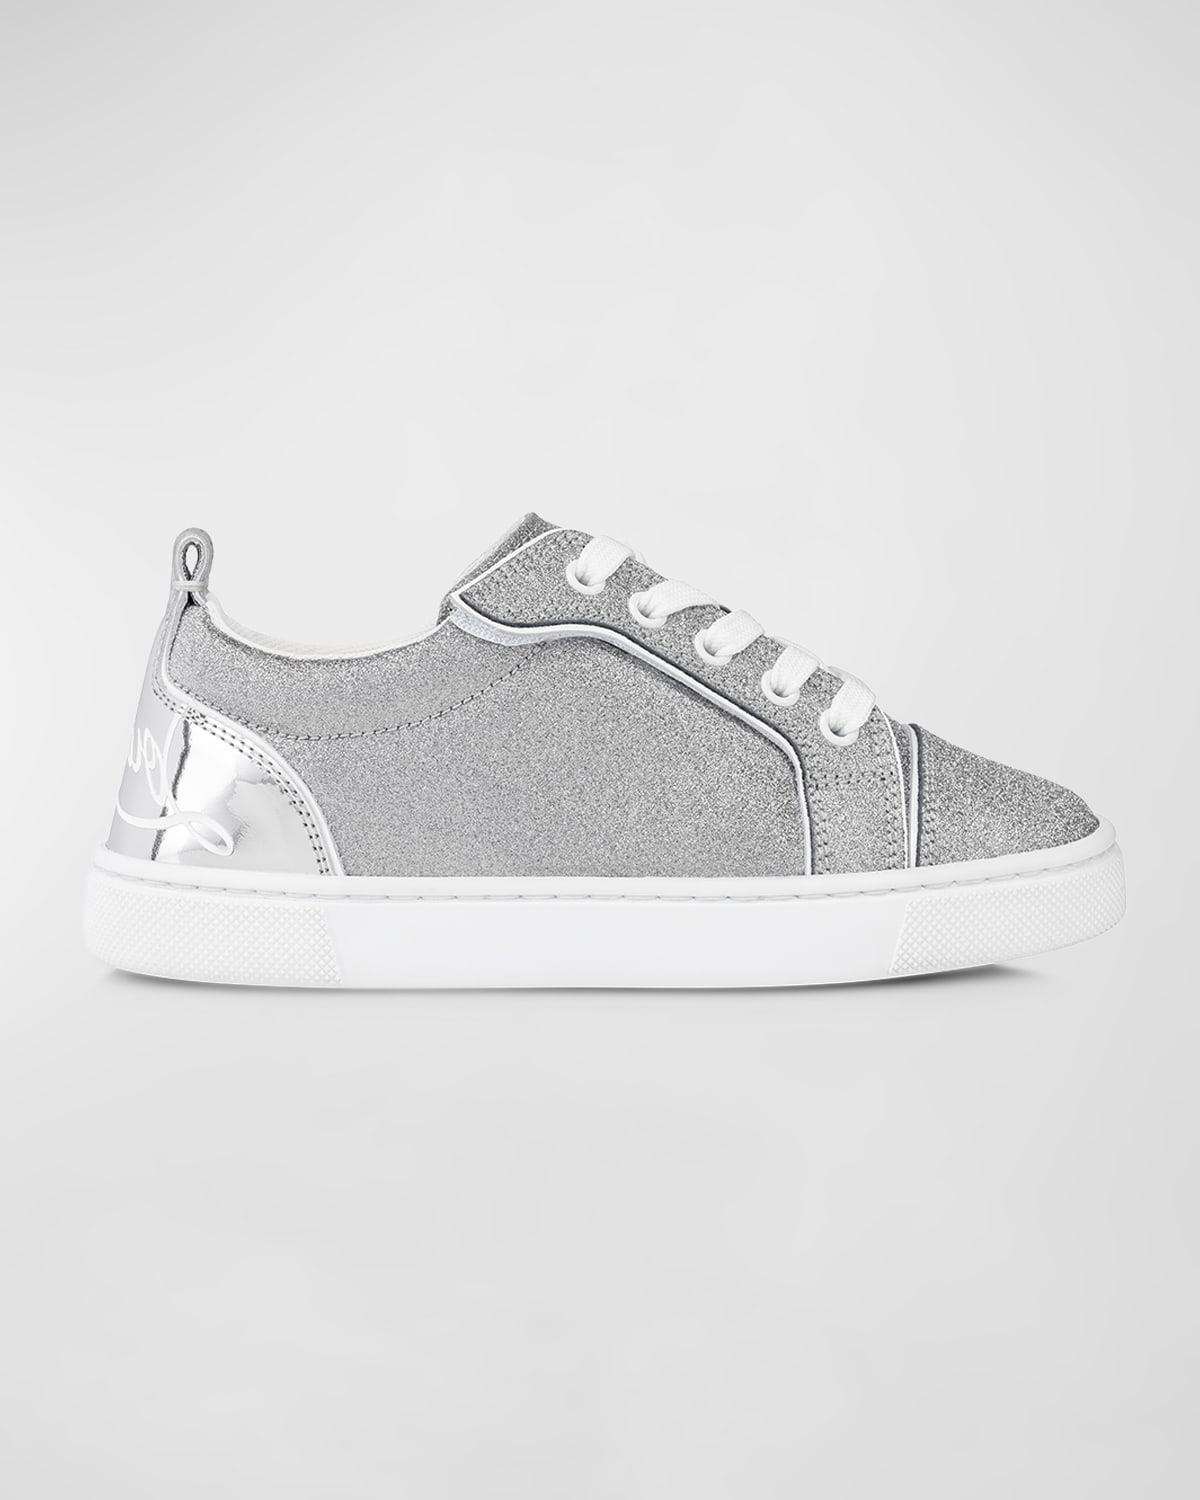 Christian Louboutin Girl's Funnyto Patent Leather Glitter Low-top Sneakers, Toddlers/kids In Silver